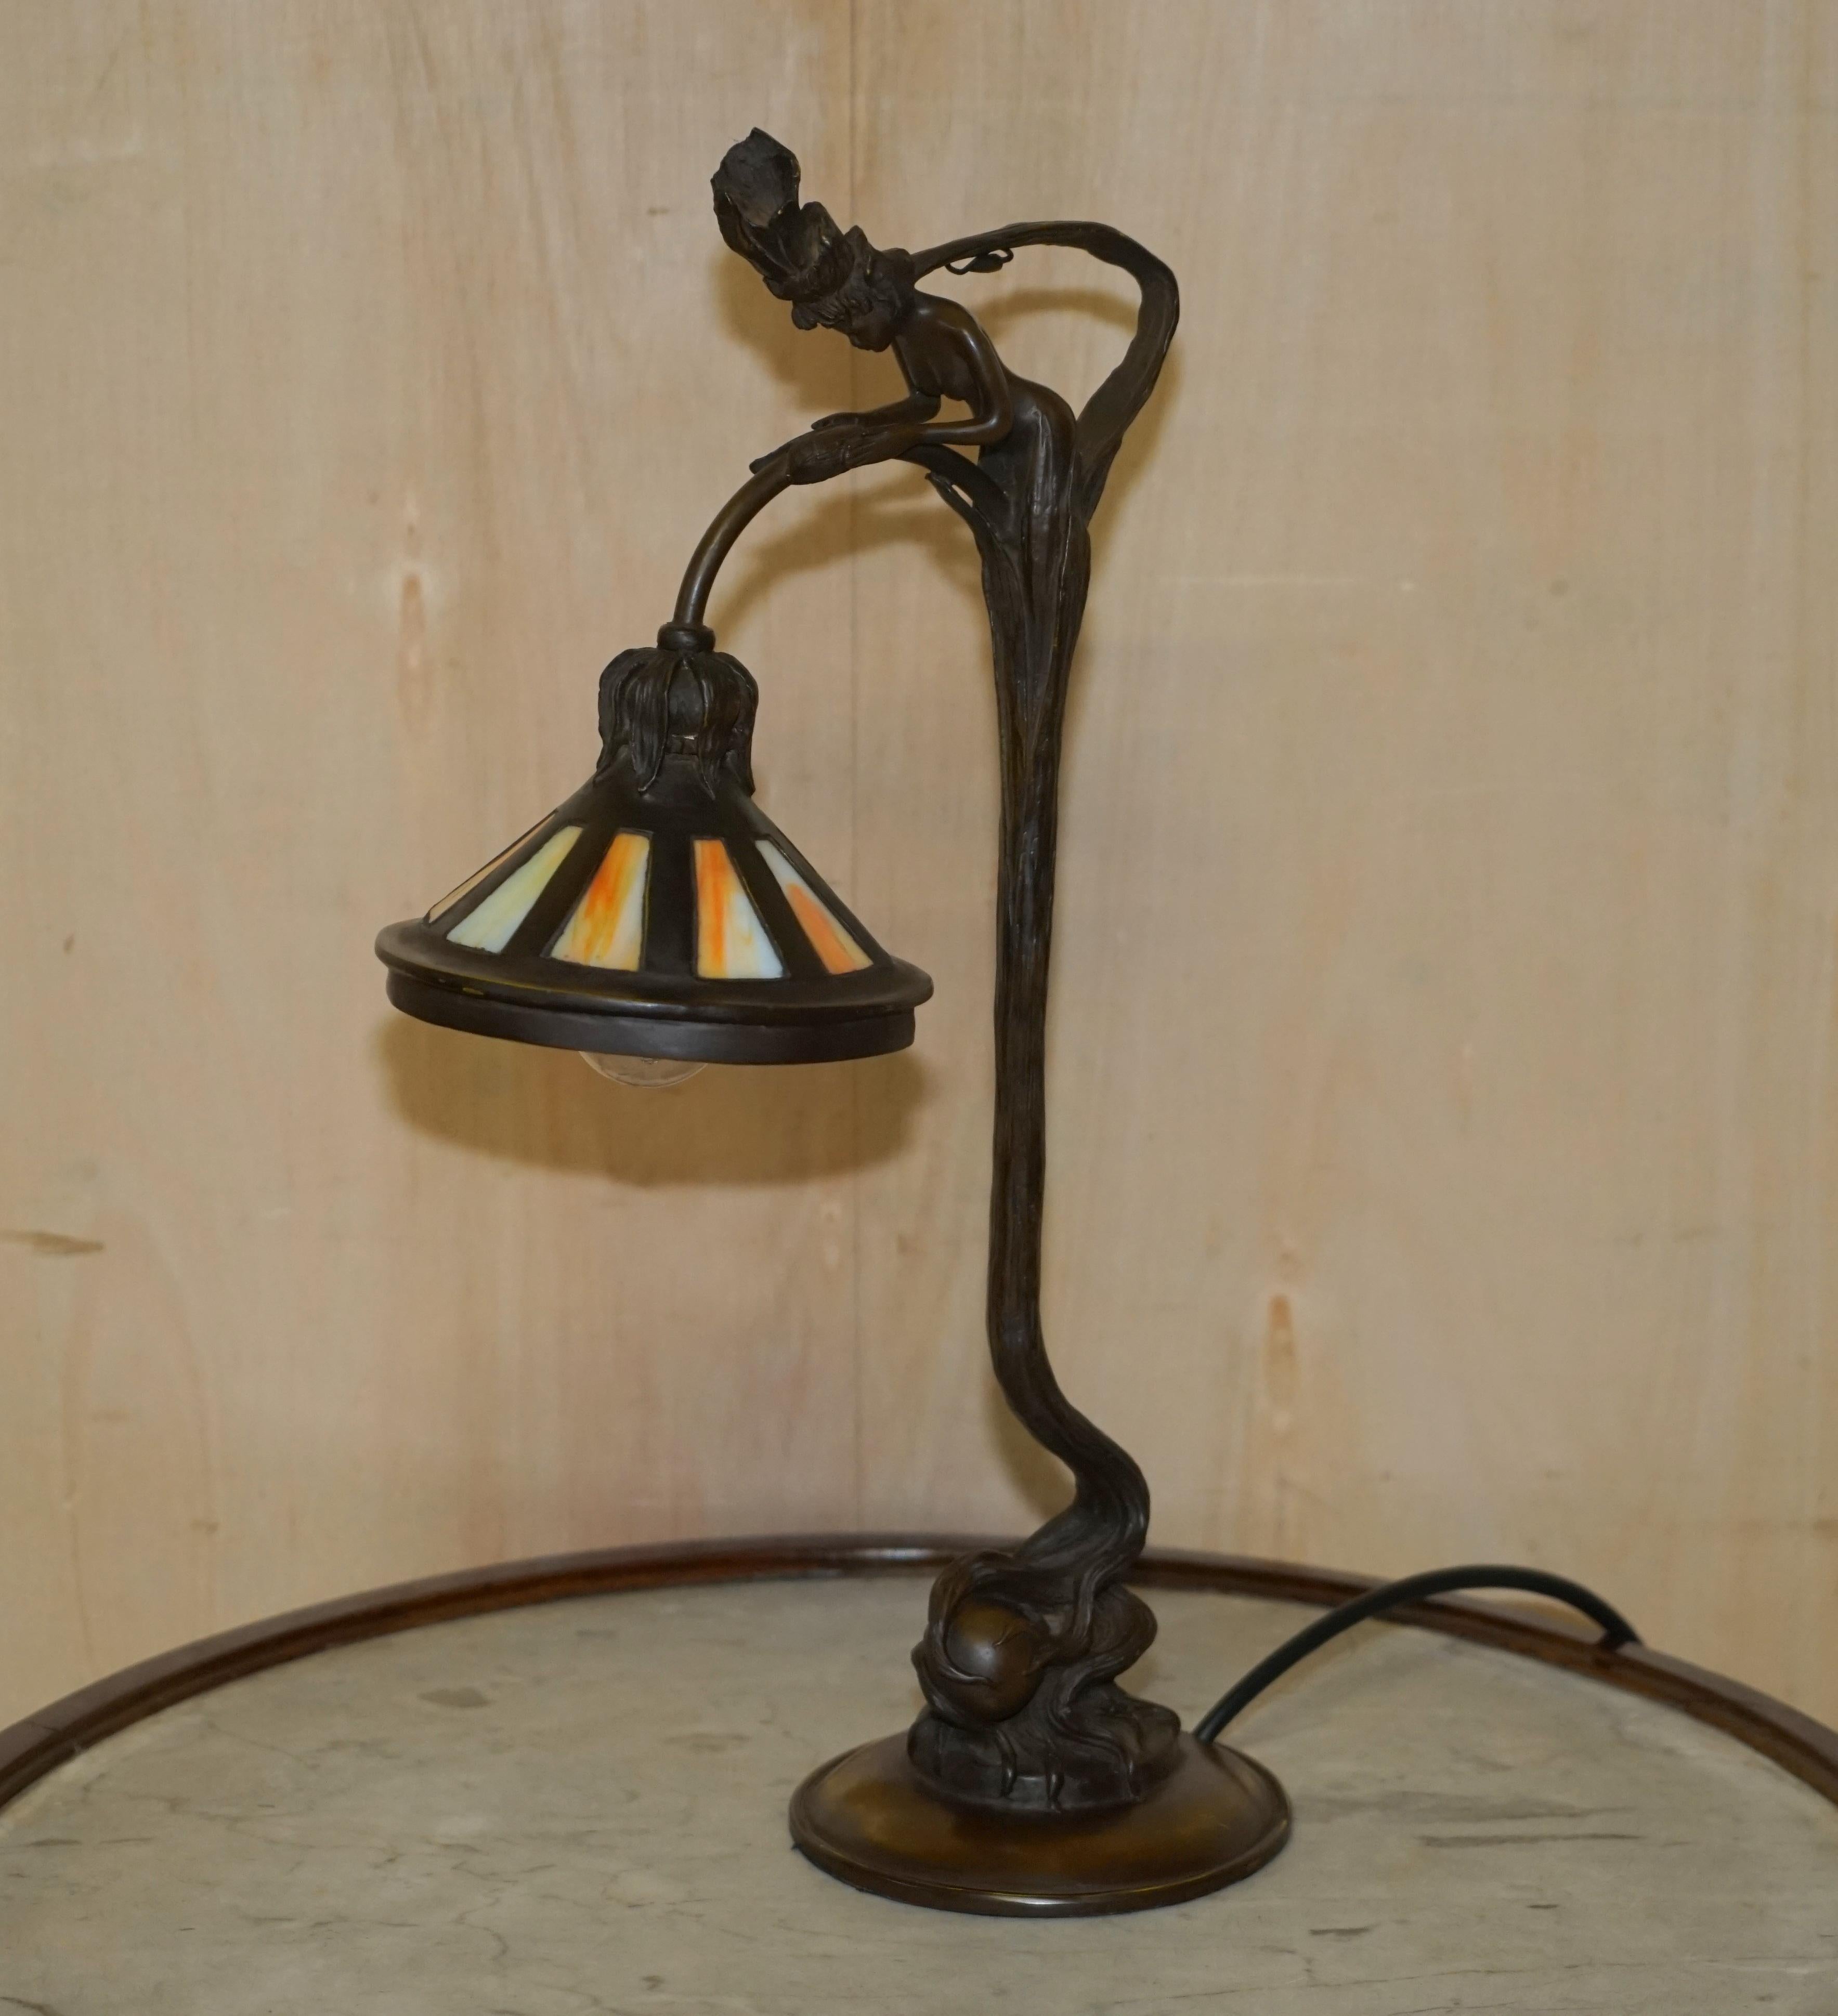 We are delighted to offer for sale this lovely original circa 1940 bronzed table lamp 

A good looking well made a decorative lamp, I bought it at the same time as a rather lovely original Tiffany Lamp so it was in good company! I bought it as its